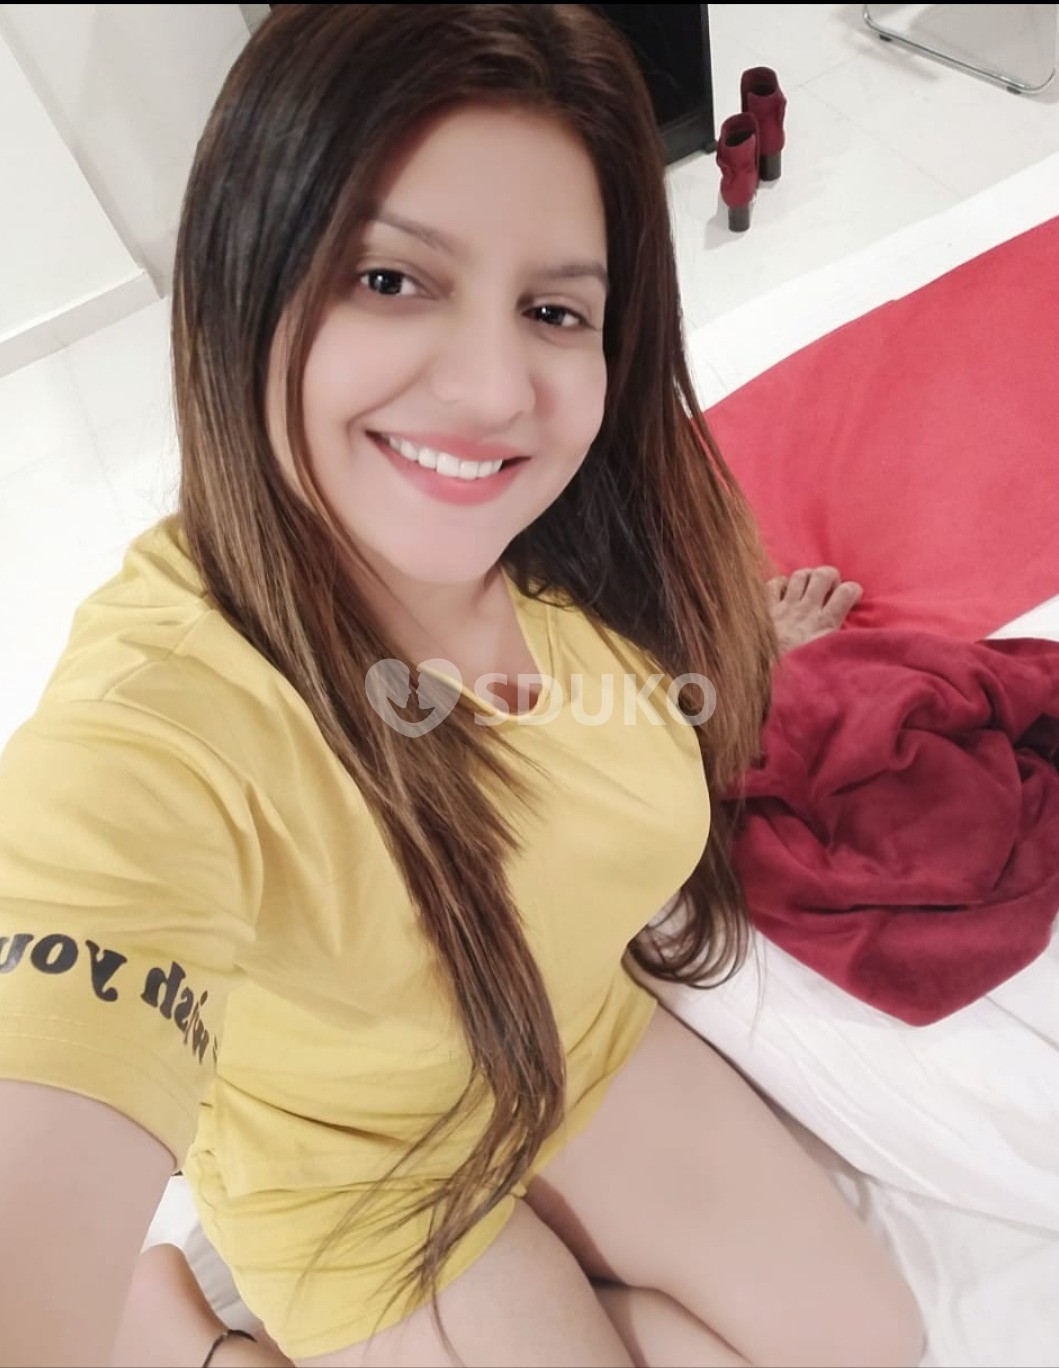 MG ROAD HOT 💋👅 VIP GIRL AVAILABLE ANAL ORAL BLOWING AVAILABLE